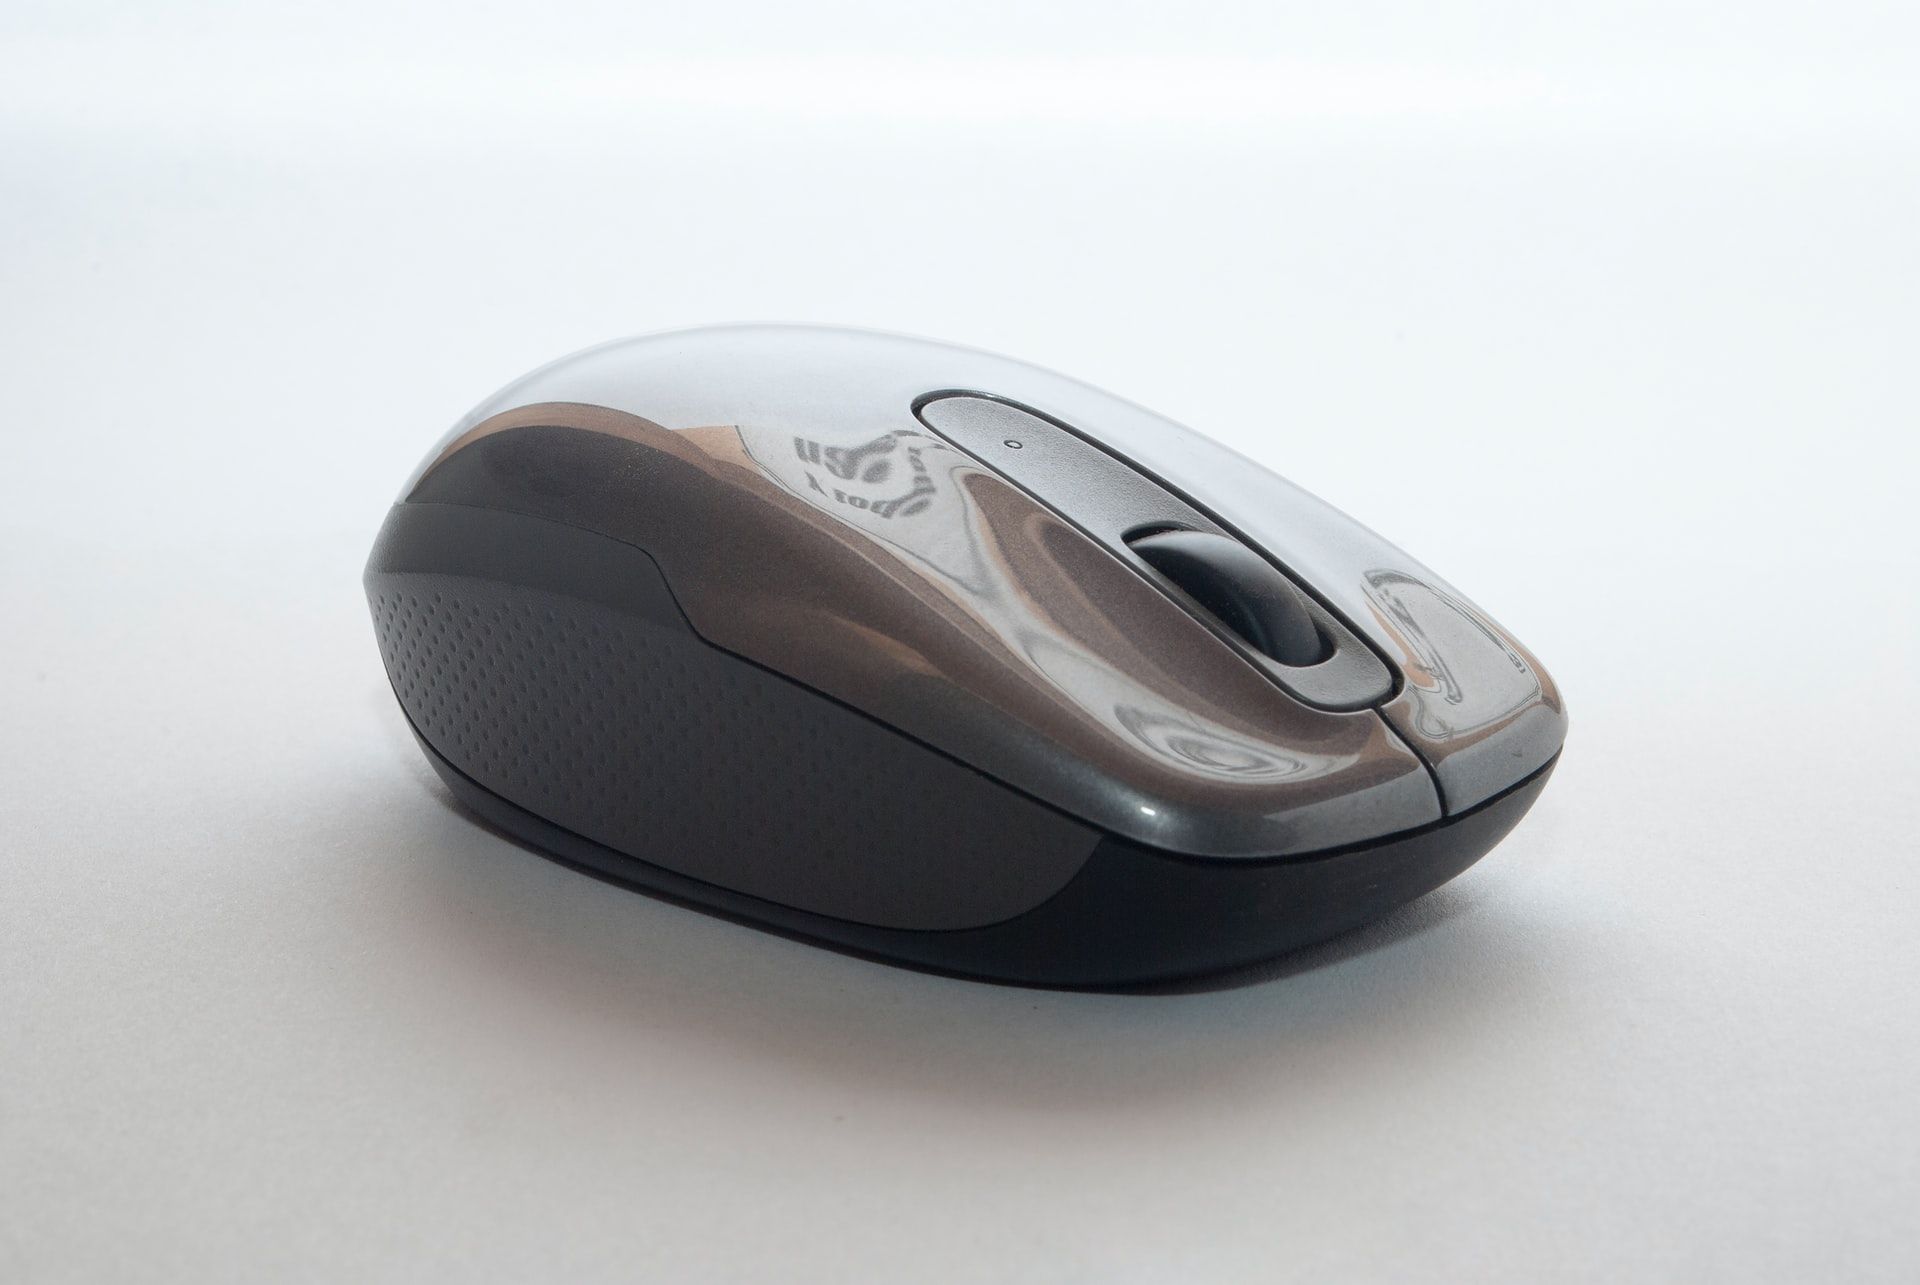 How to Change Mouse DPI Settings in Windows 10